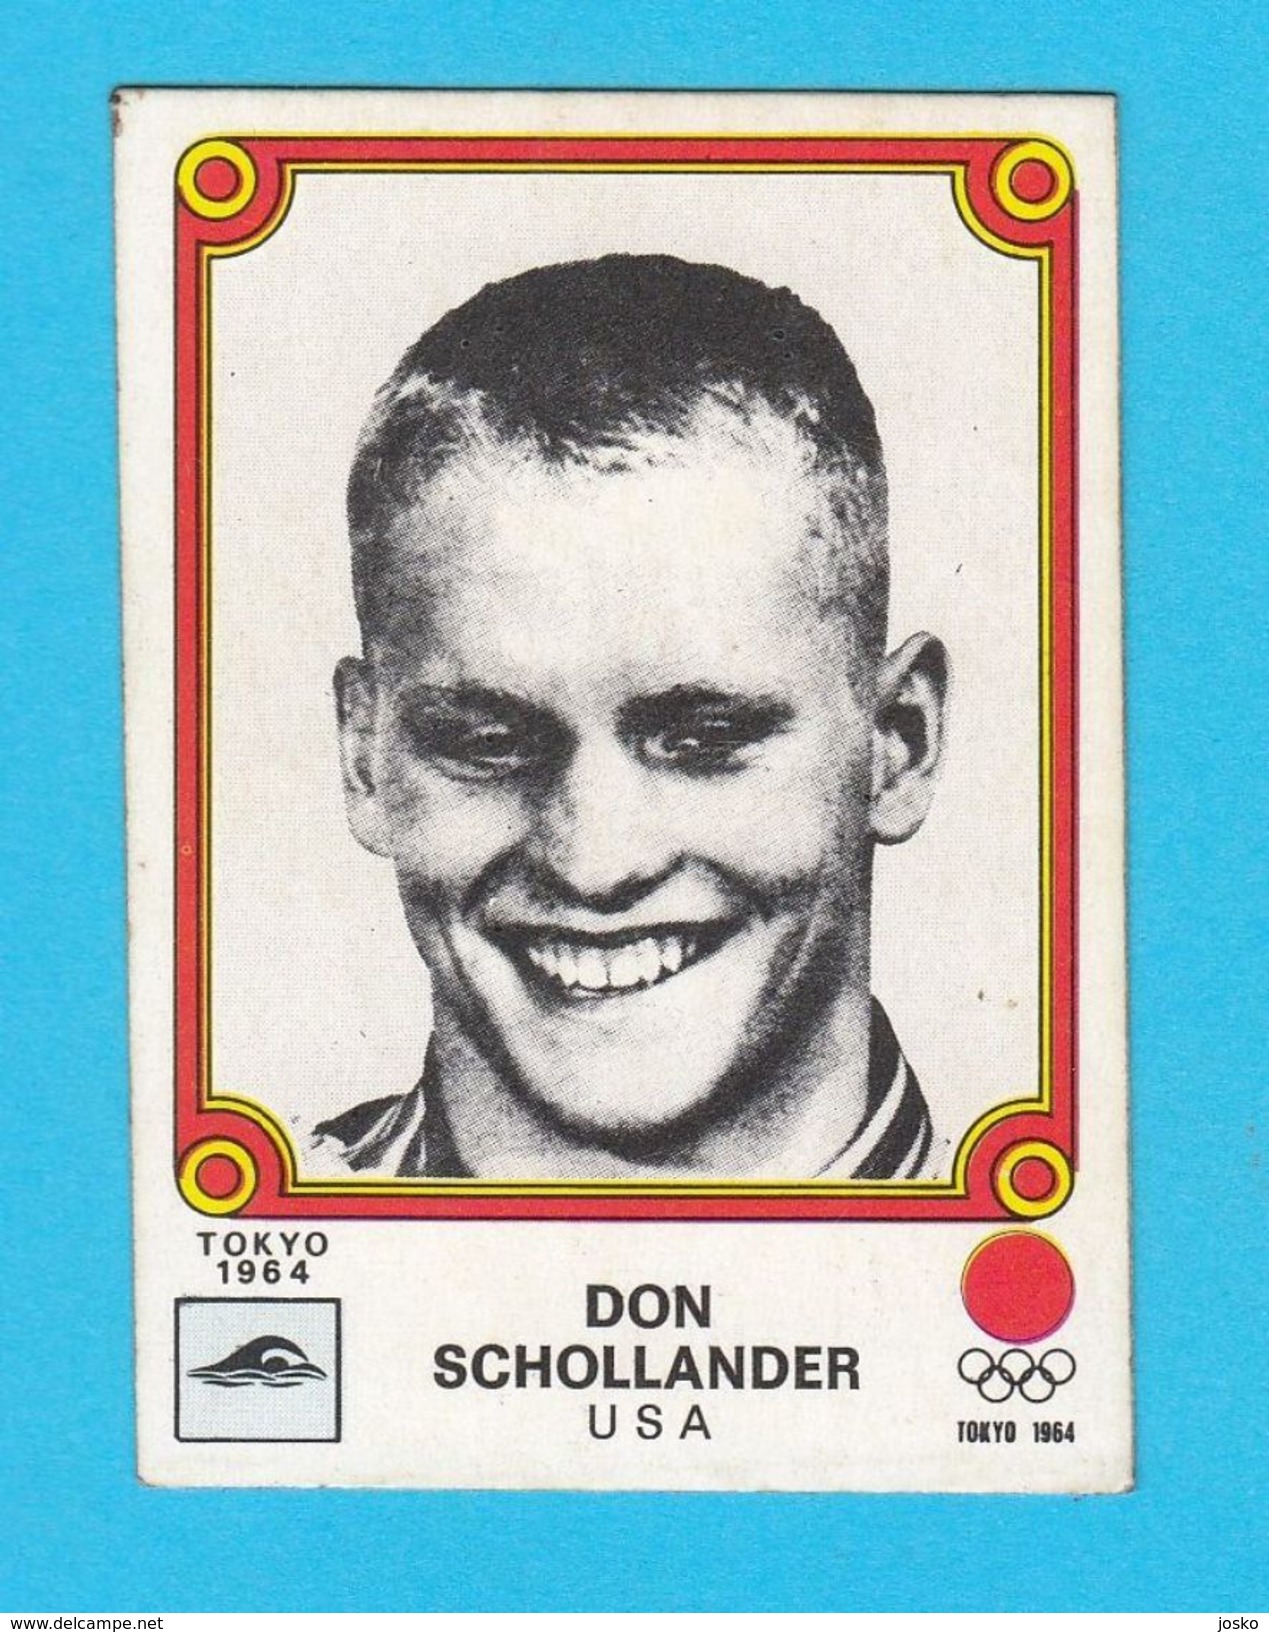 PANINI ROOKIE CARD - OLYMPIC GAMES MONTREAL '76. No. 83. DON SCHOLLANDER - USA Swimming Juex Olympiques 1976 Olympia - Trading Cards